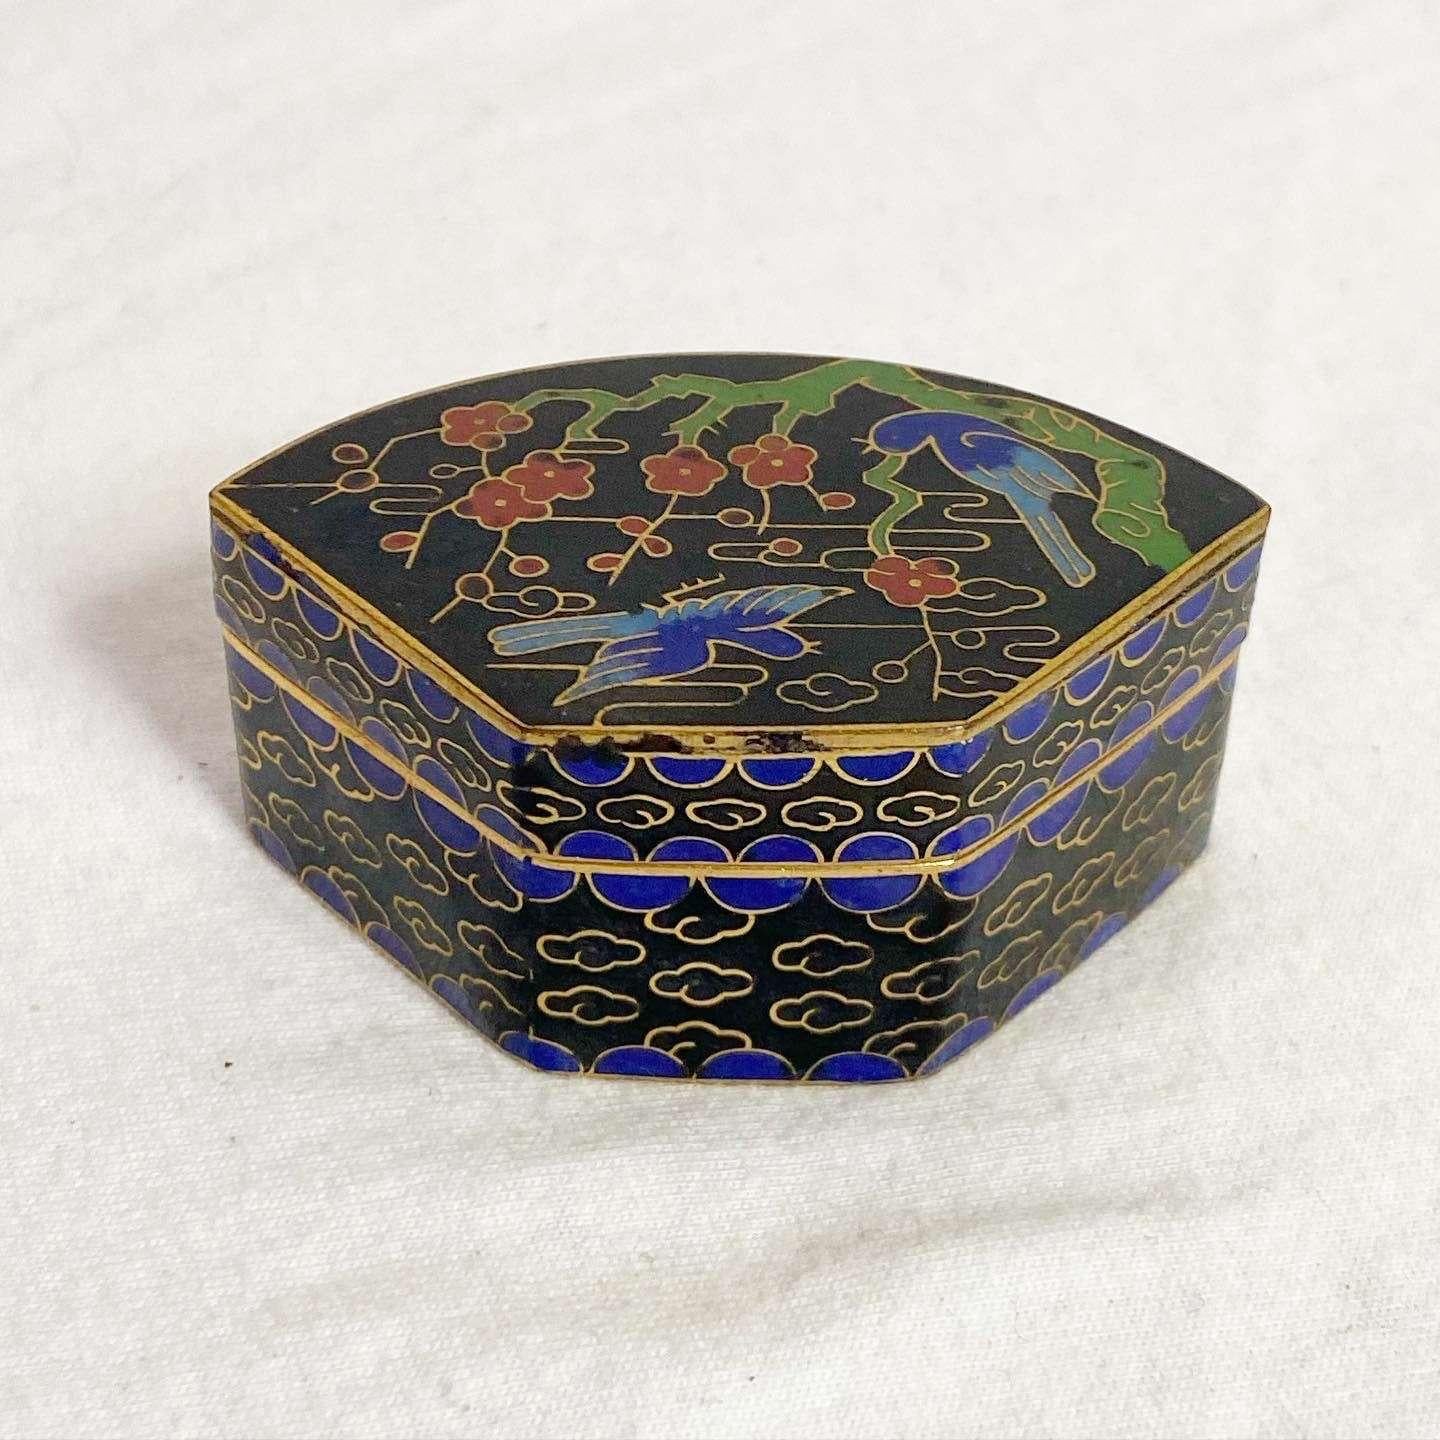 1965 Vintage Chinoiserie Enameled Trinket Box In Good Condition For Sale In Delray Beach, FL